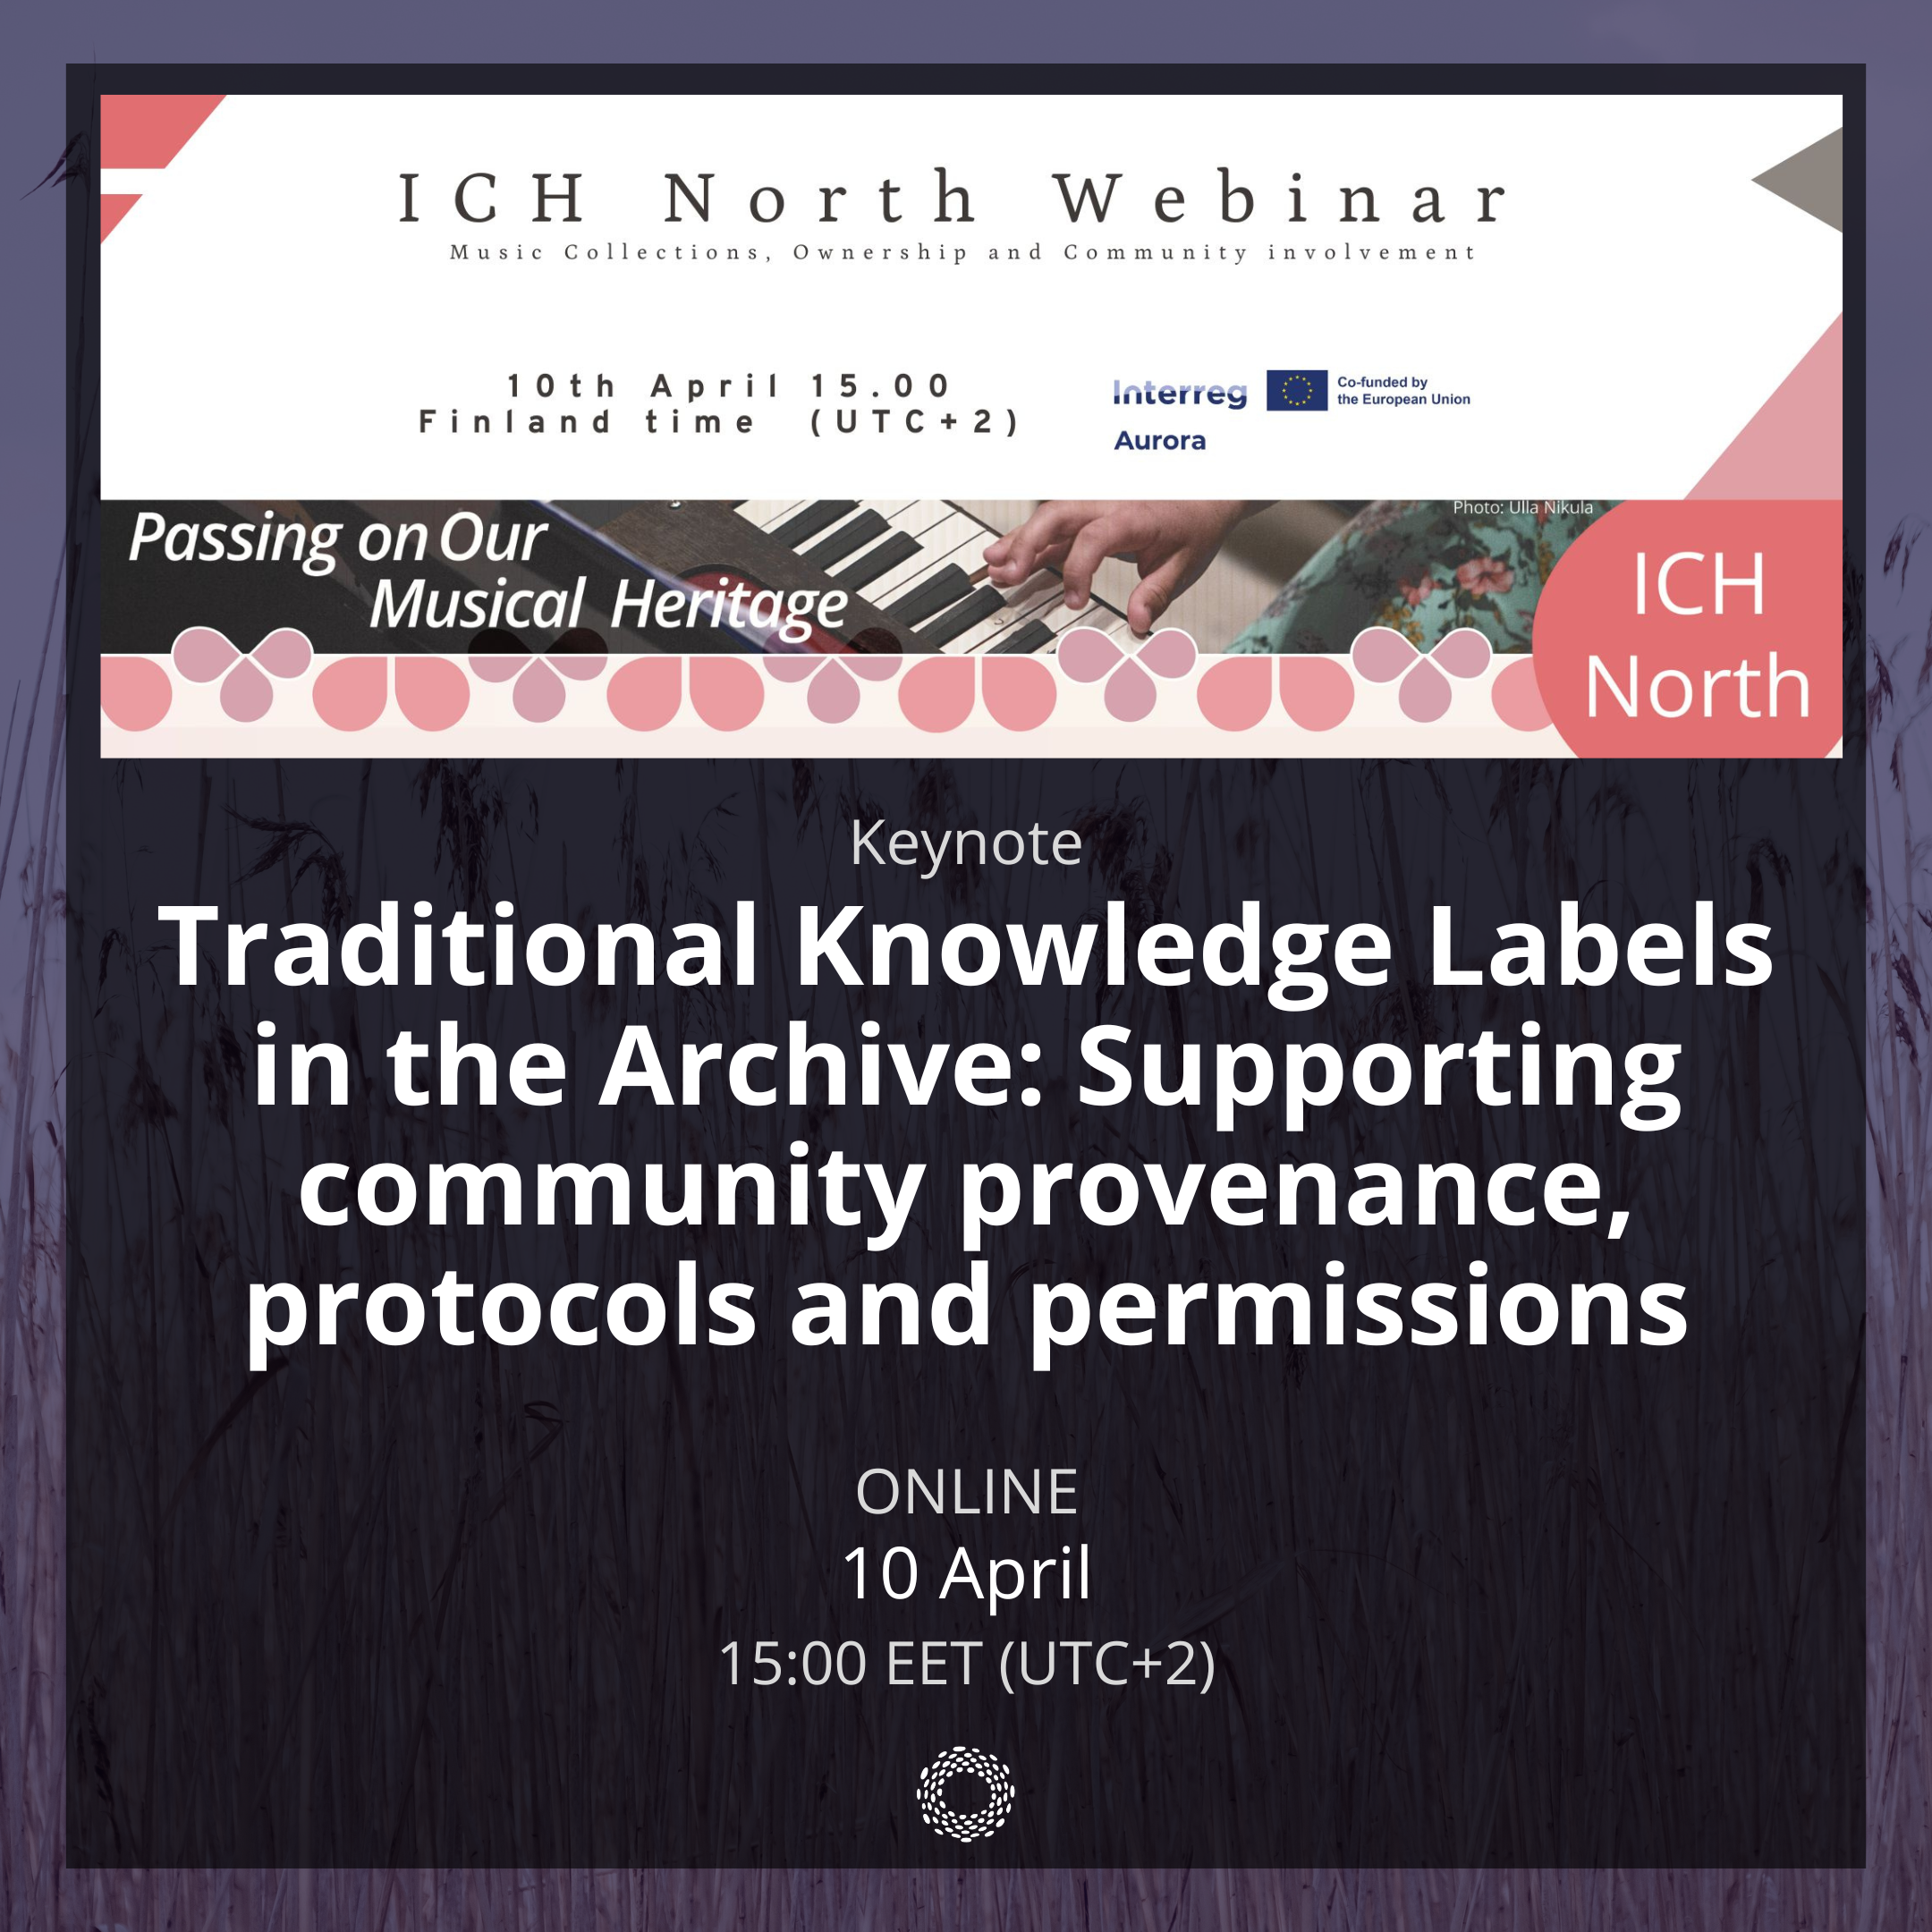 ICH North webinar. Music collections, ownership, and community involvement. 10 April, 15:00 Finland time (UTC+2). Passing on our musical heritage. Keynote. Traditional Knowledge Labels in the Archive. Supporting community provenance, protocols, and permission. Online. 10 April. 15:00 EET (UTC+2).